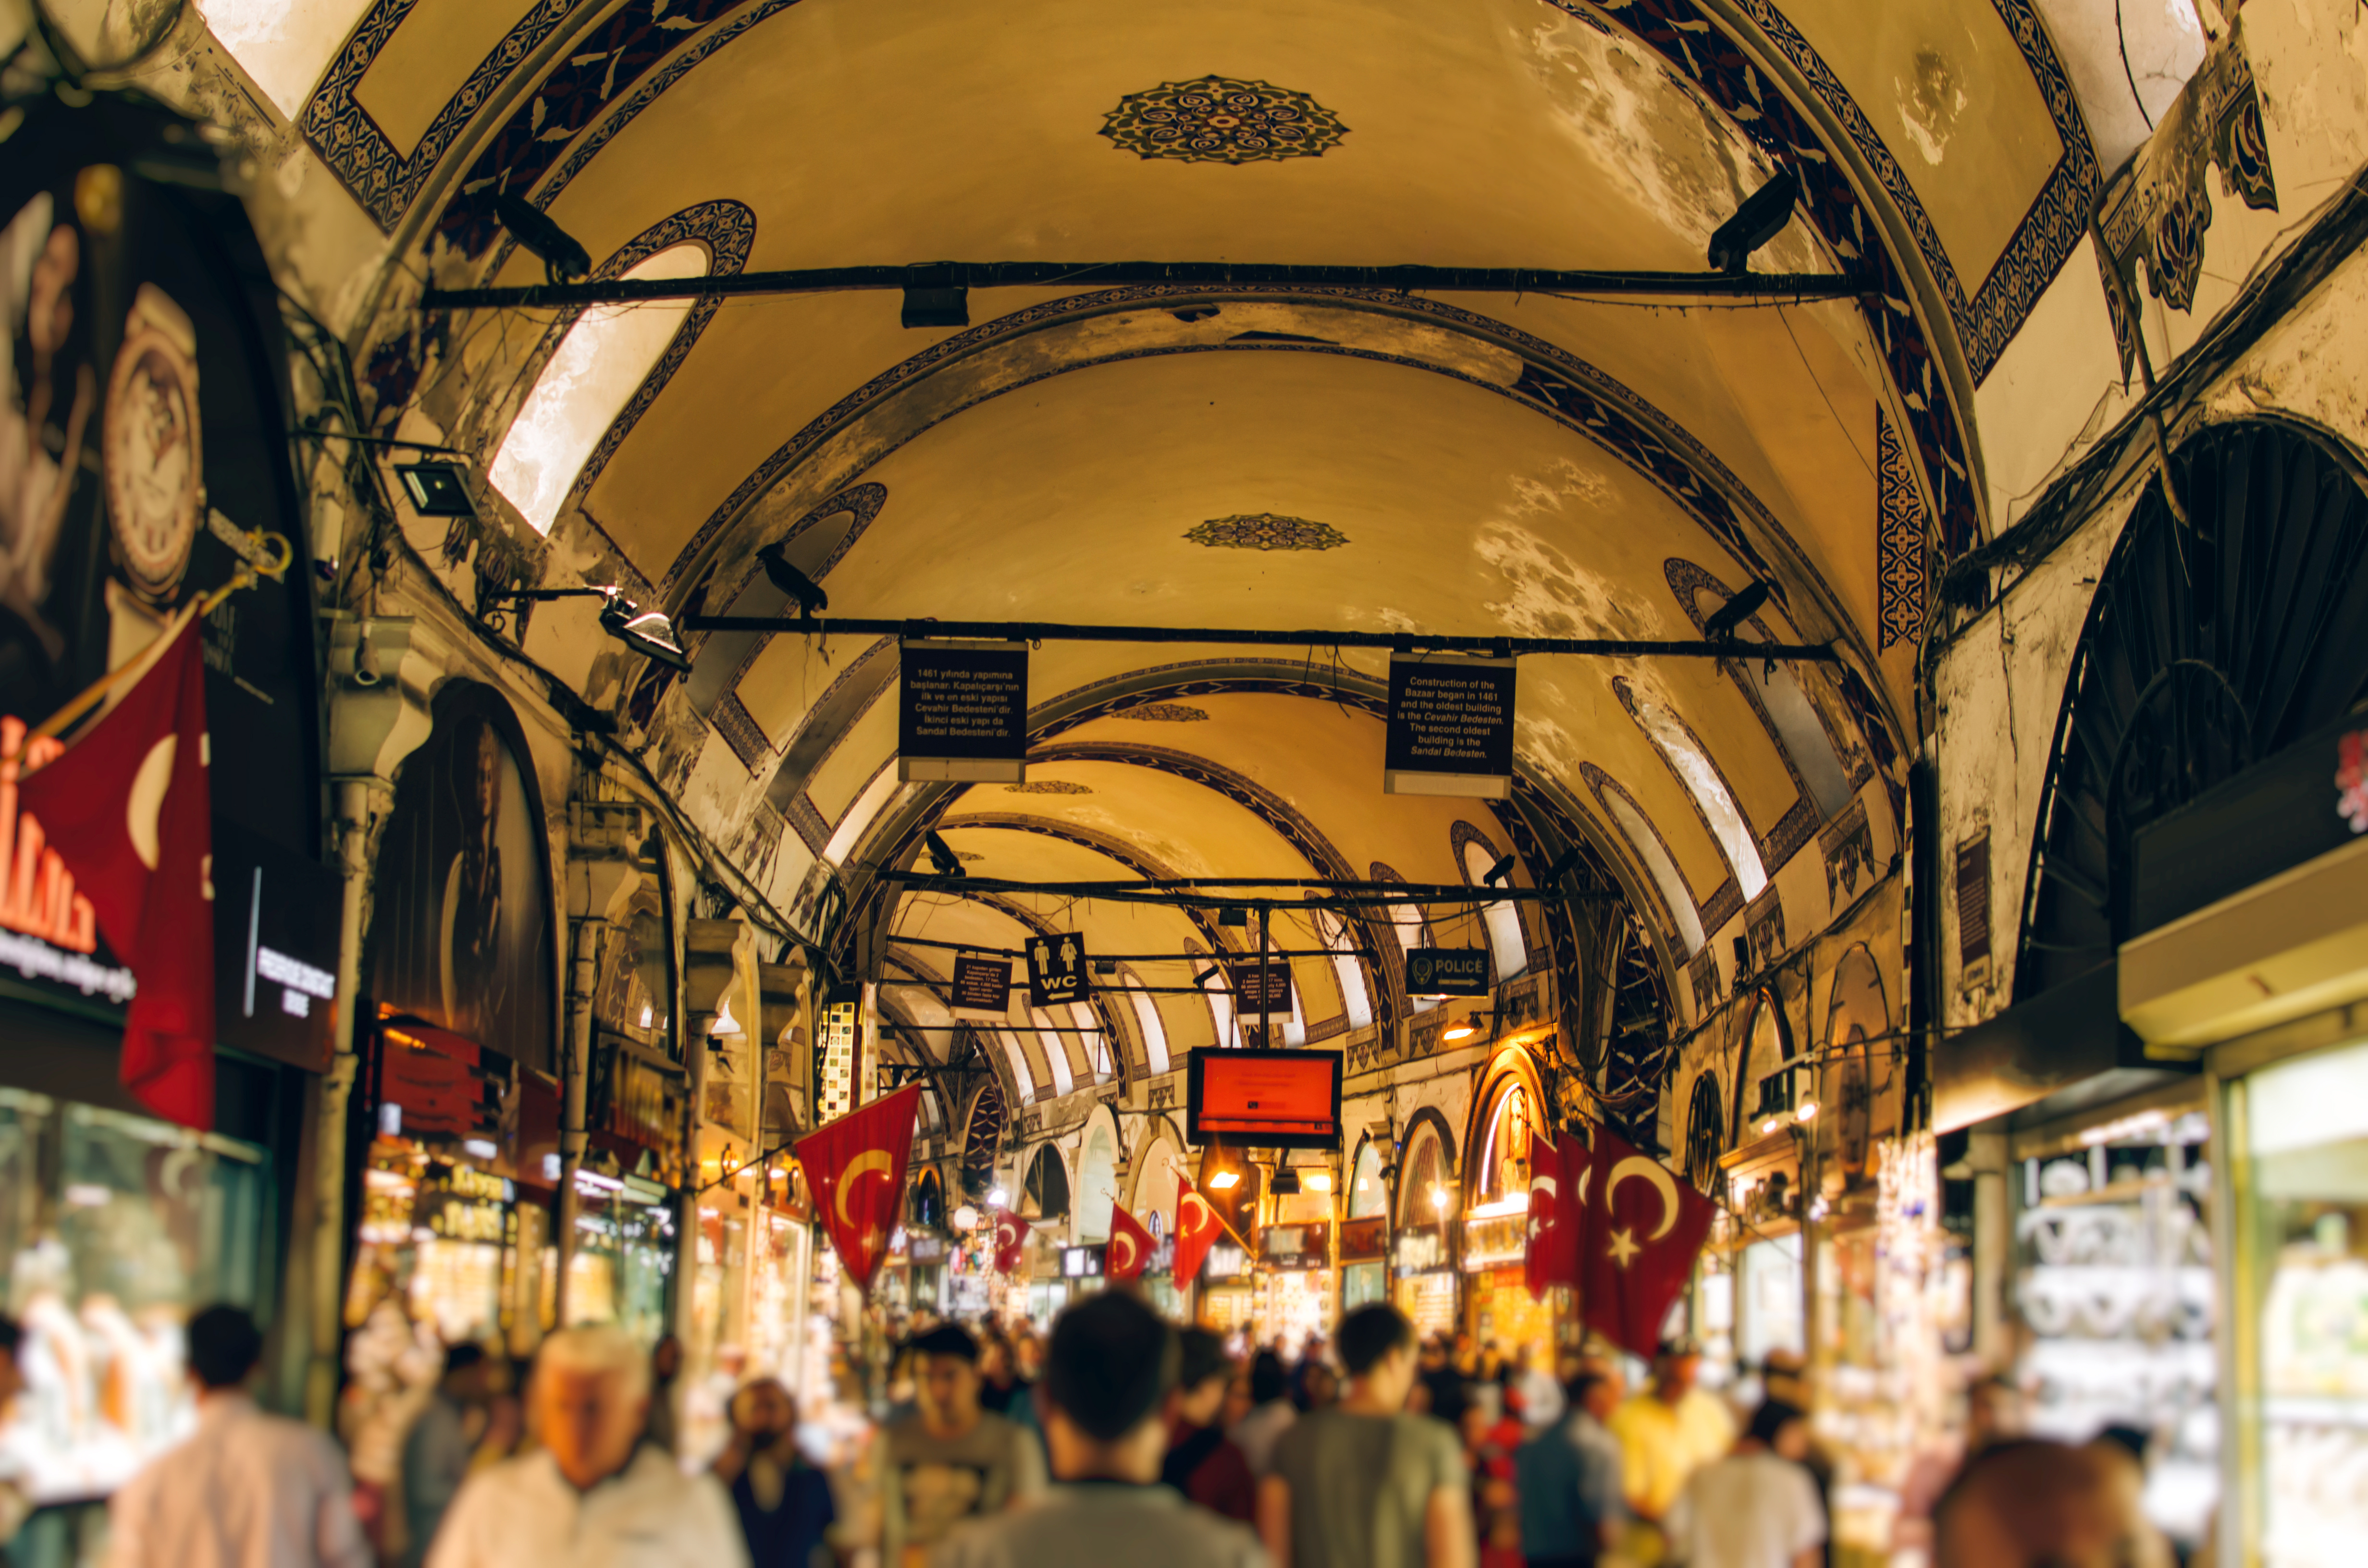 A crowded hall in the Grand Bazaar.